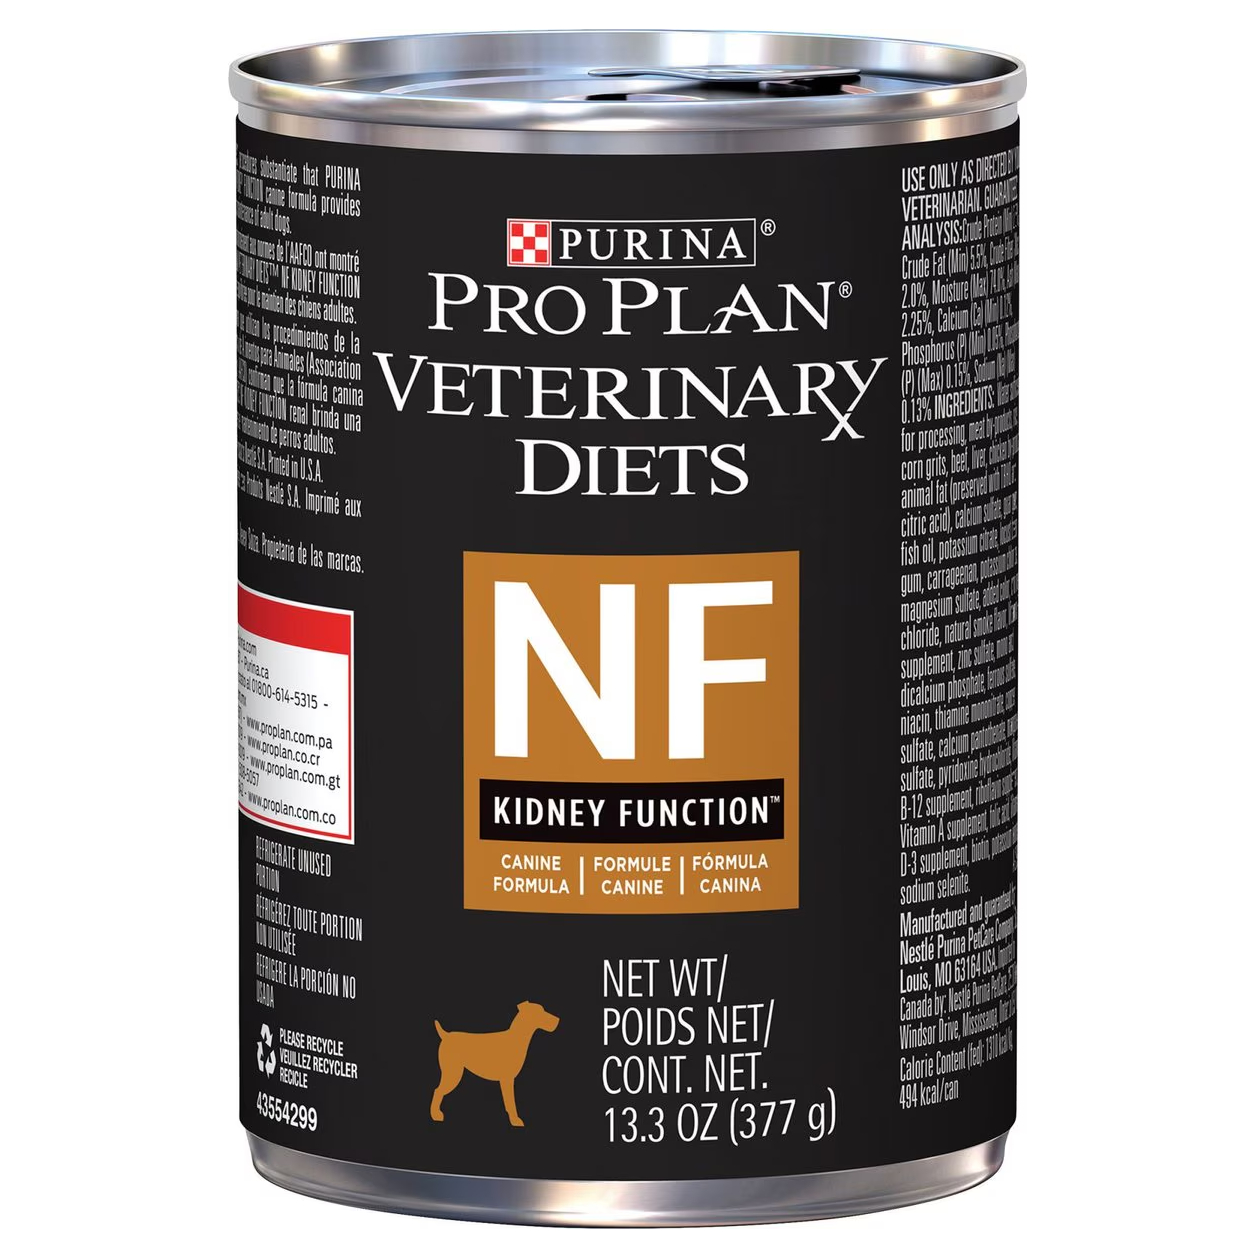 Purina Pro Plan Veterinary Diets NF Kidney Function Wet Dog Food